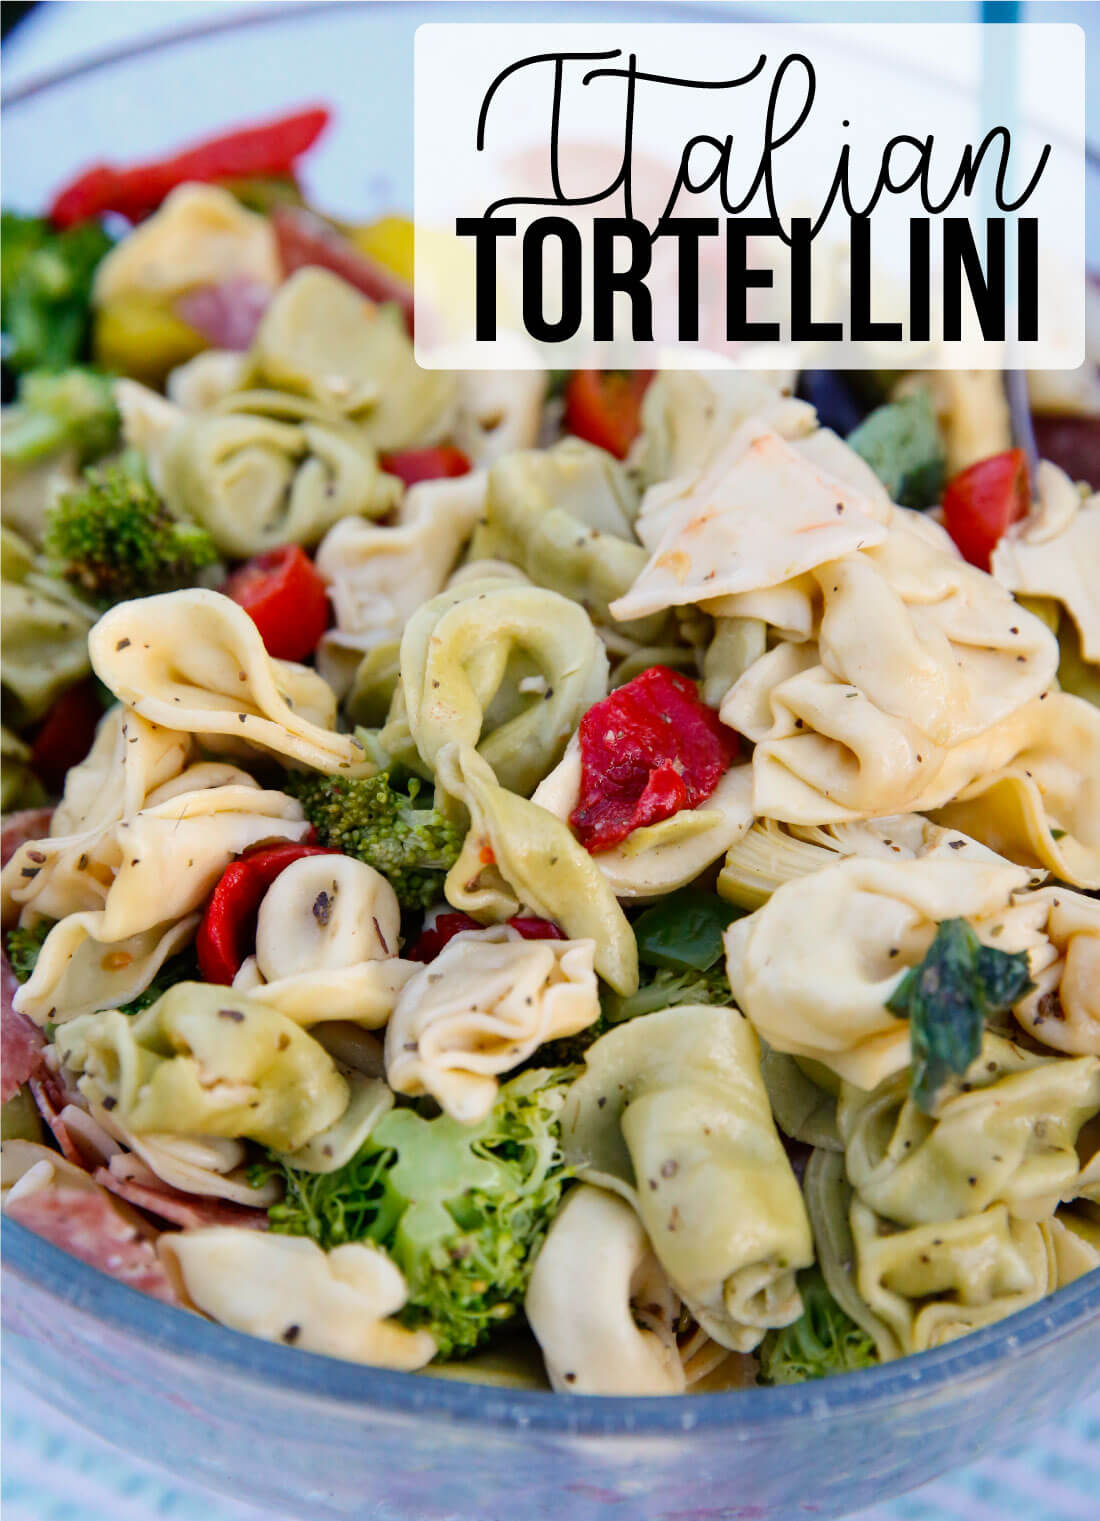 An awesome Italian salad with tortellini, vegetables meats and cheese. This Italian Tortellini Salad will be a huge hit wherever you take it! Perfect potluck dish. www.thirtyhandmadedays.com